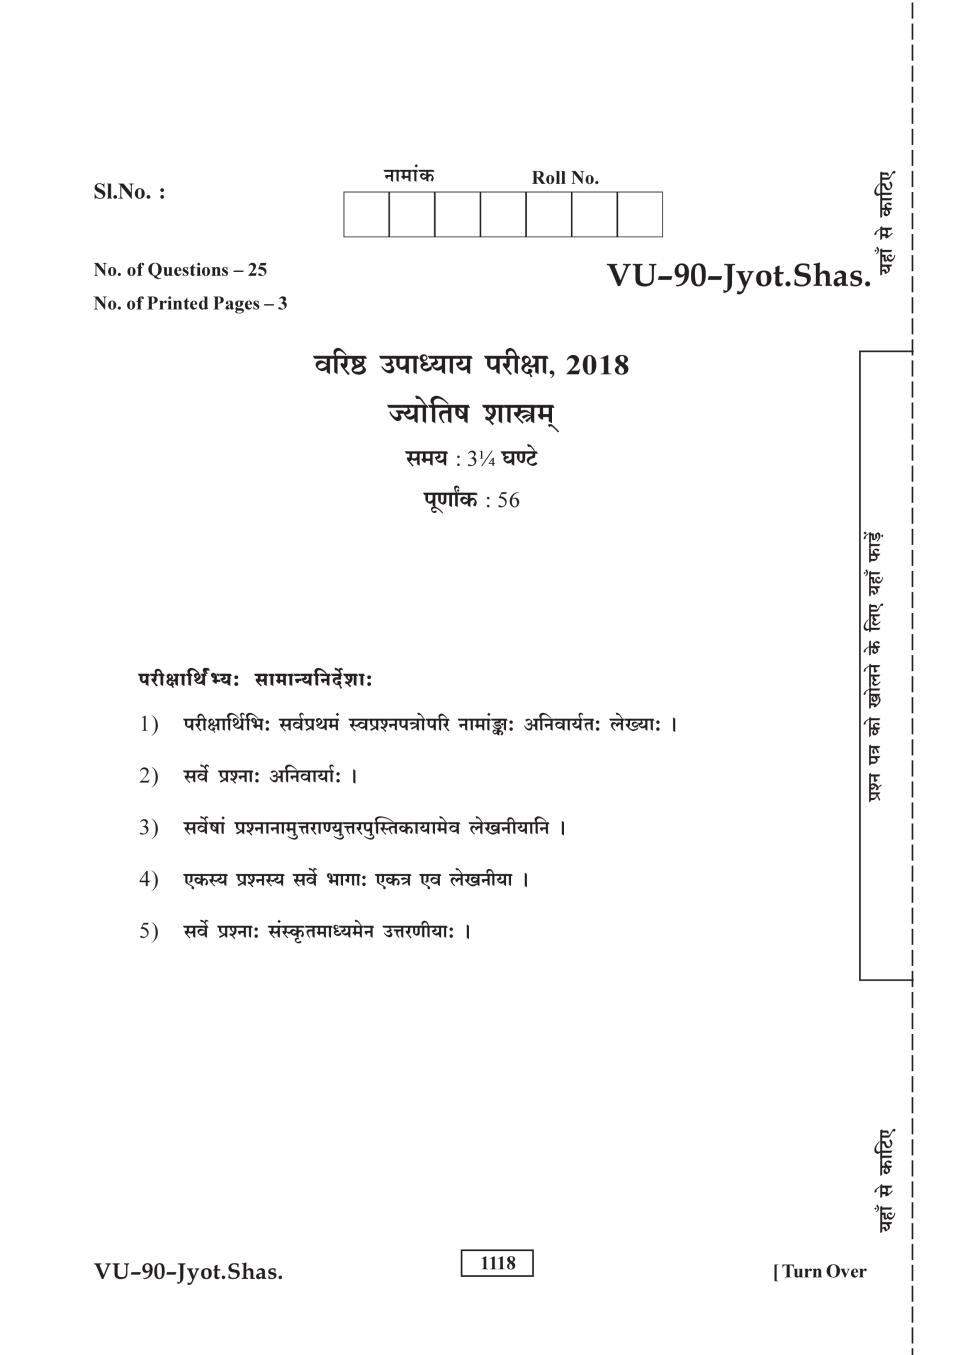 Rajasthan Board V Upadhyay Jyoti Shastram Question Paper 2018 - Page 1